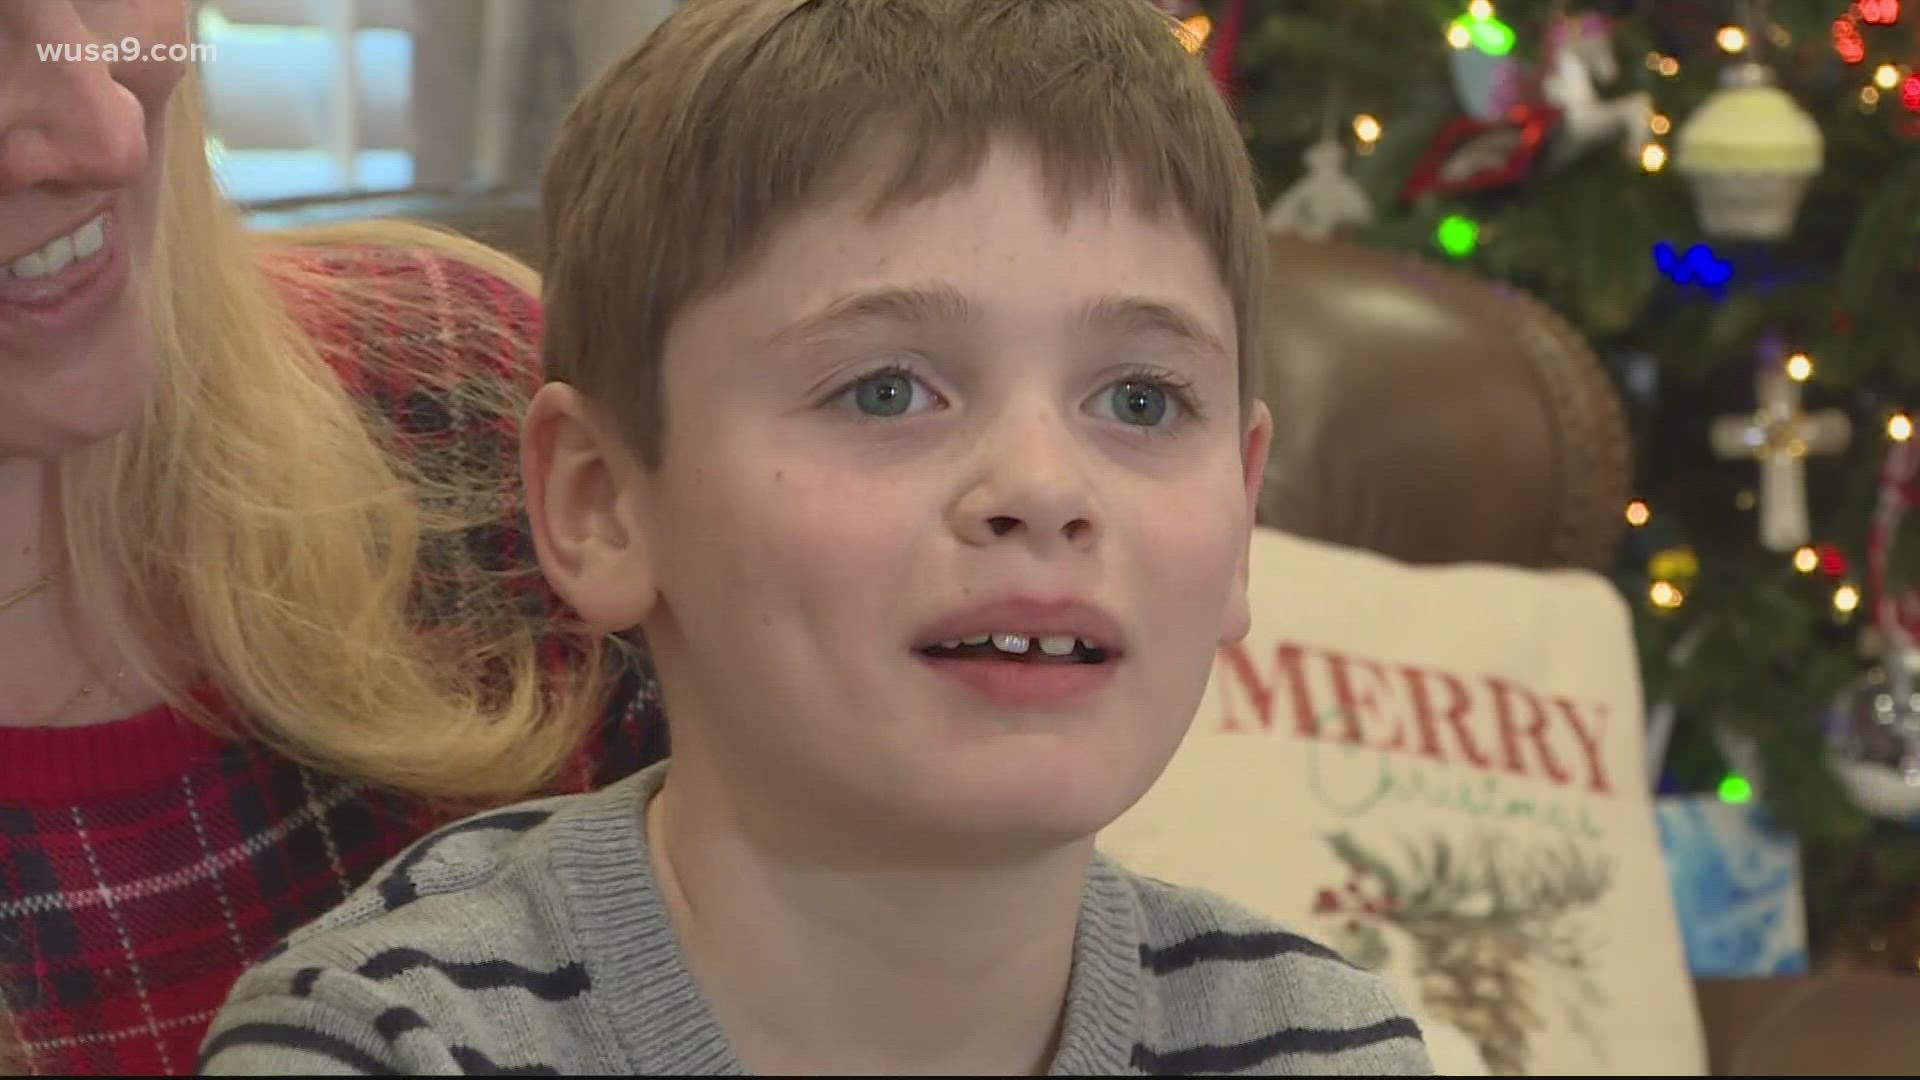 A simple act of kindness meant the world to 10-year-old Jack and his mom.